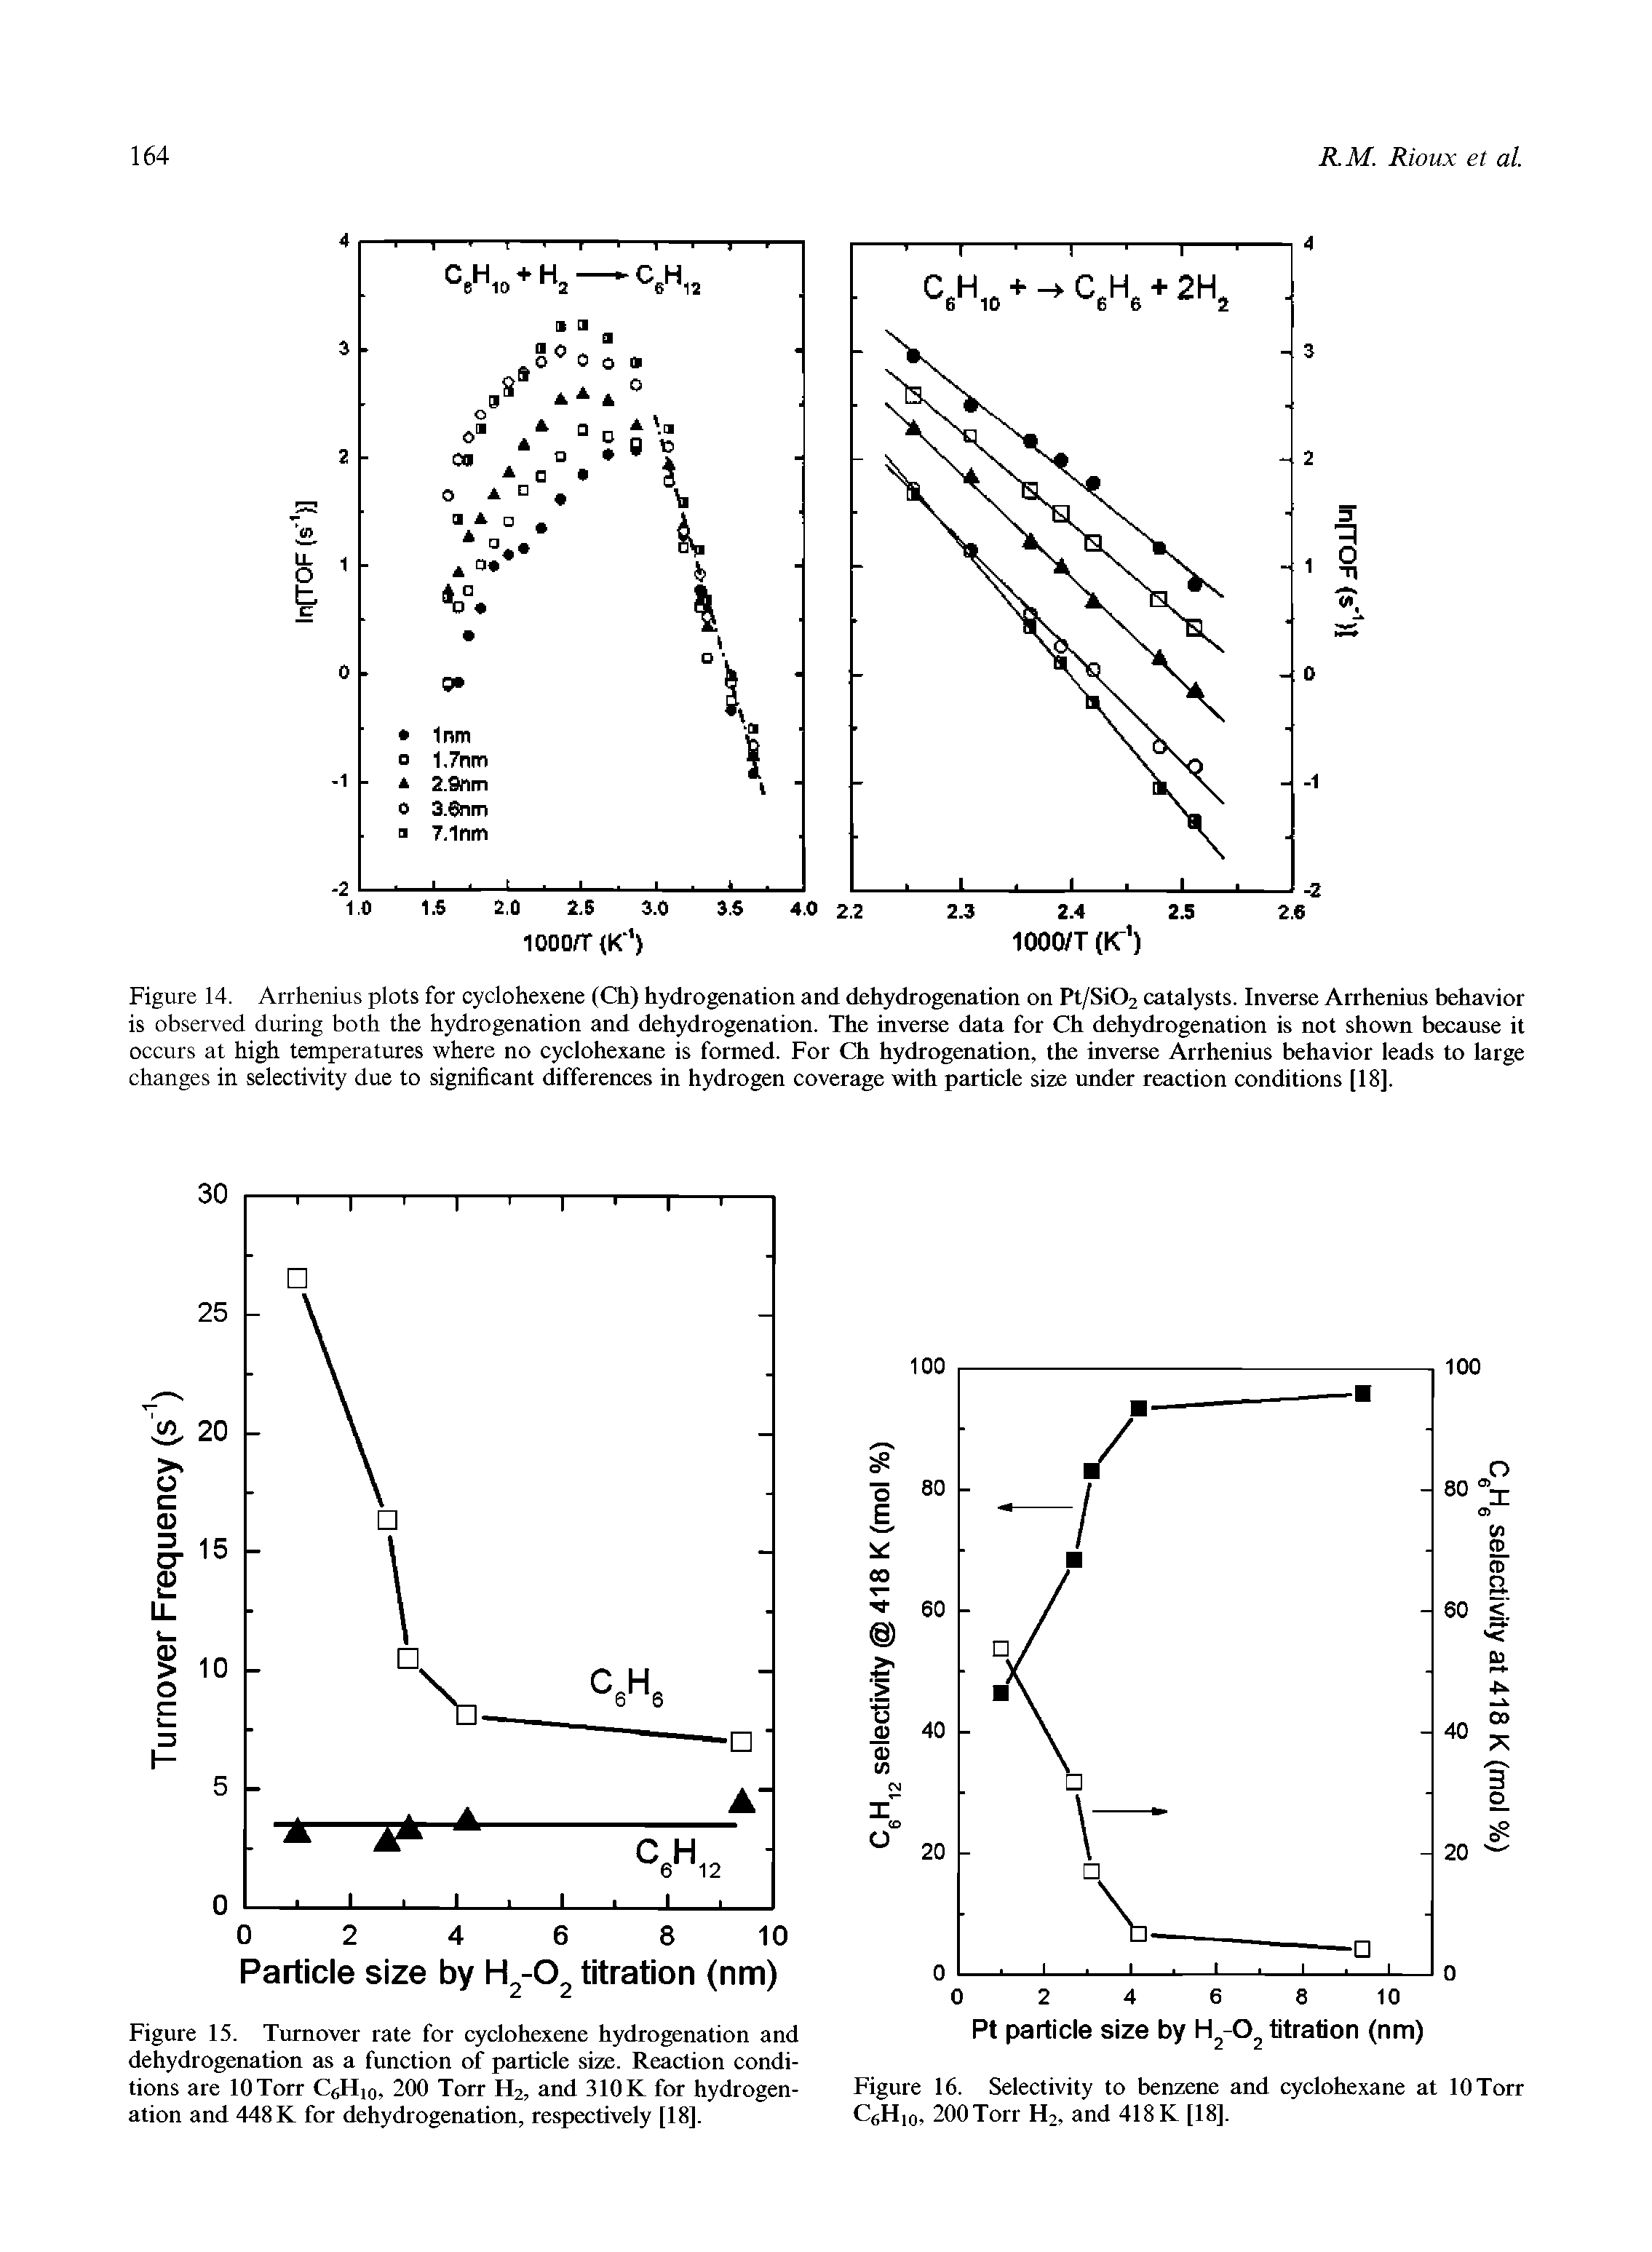 Figure 15. Turnover rate for cyclohexene hydrogenation and dehydrogenation as a function of particle size. Reaction conditions are lOTorr CeHio, 200 Torr H2, and 310K for hydrogenation and 448 K for dehydrogenation, respectively [18].